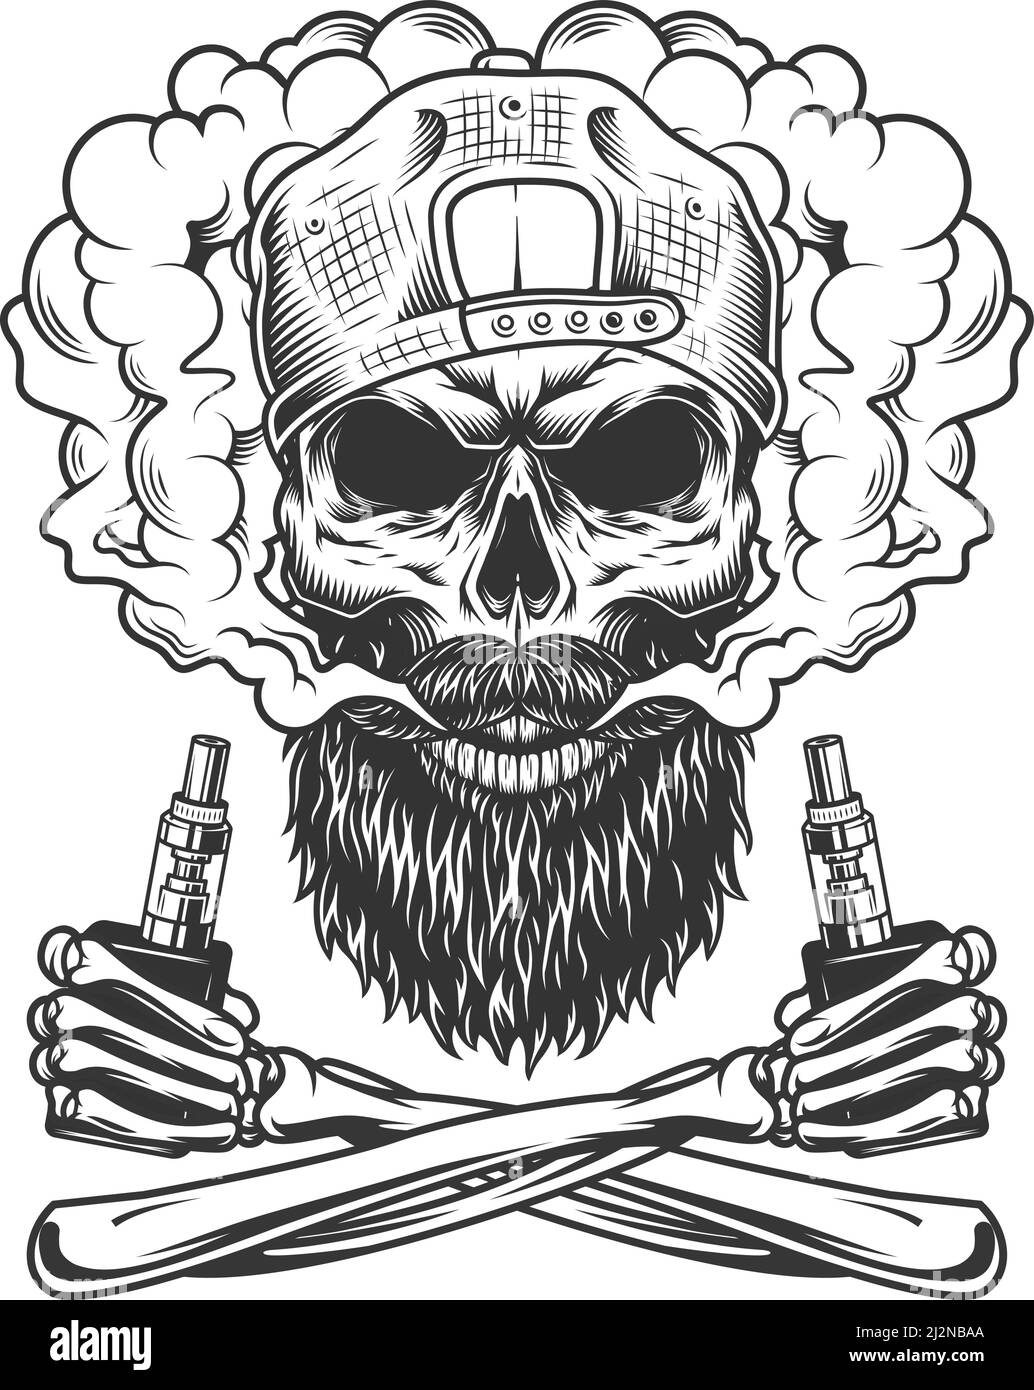 Bearded and mustached hipster skull wearing cap in smoke cloud and crossed skeleton hands holding vaporizers in vintage style isolated vector illustra Stock Vector